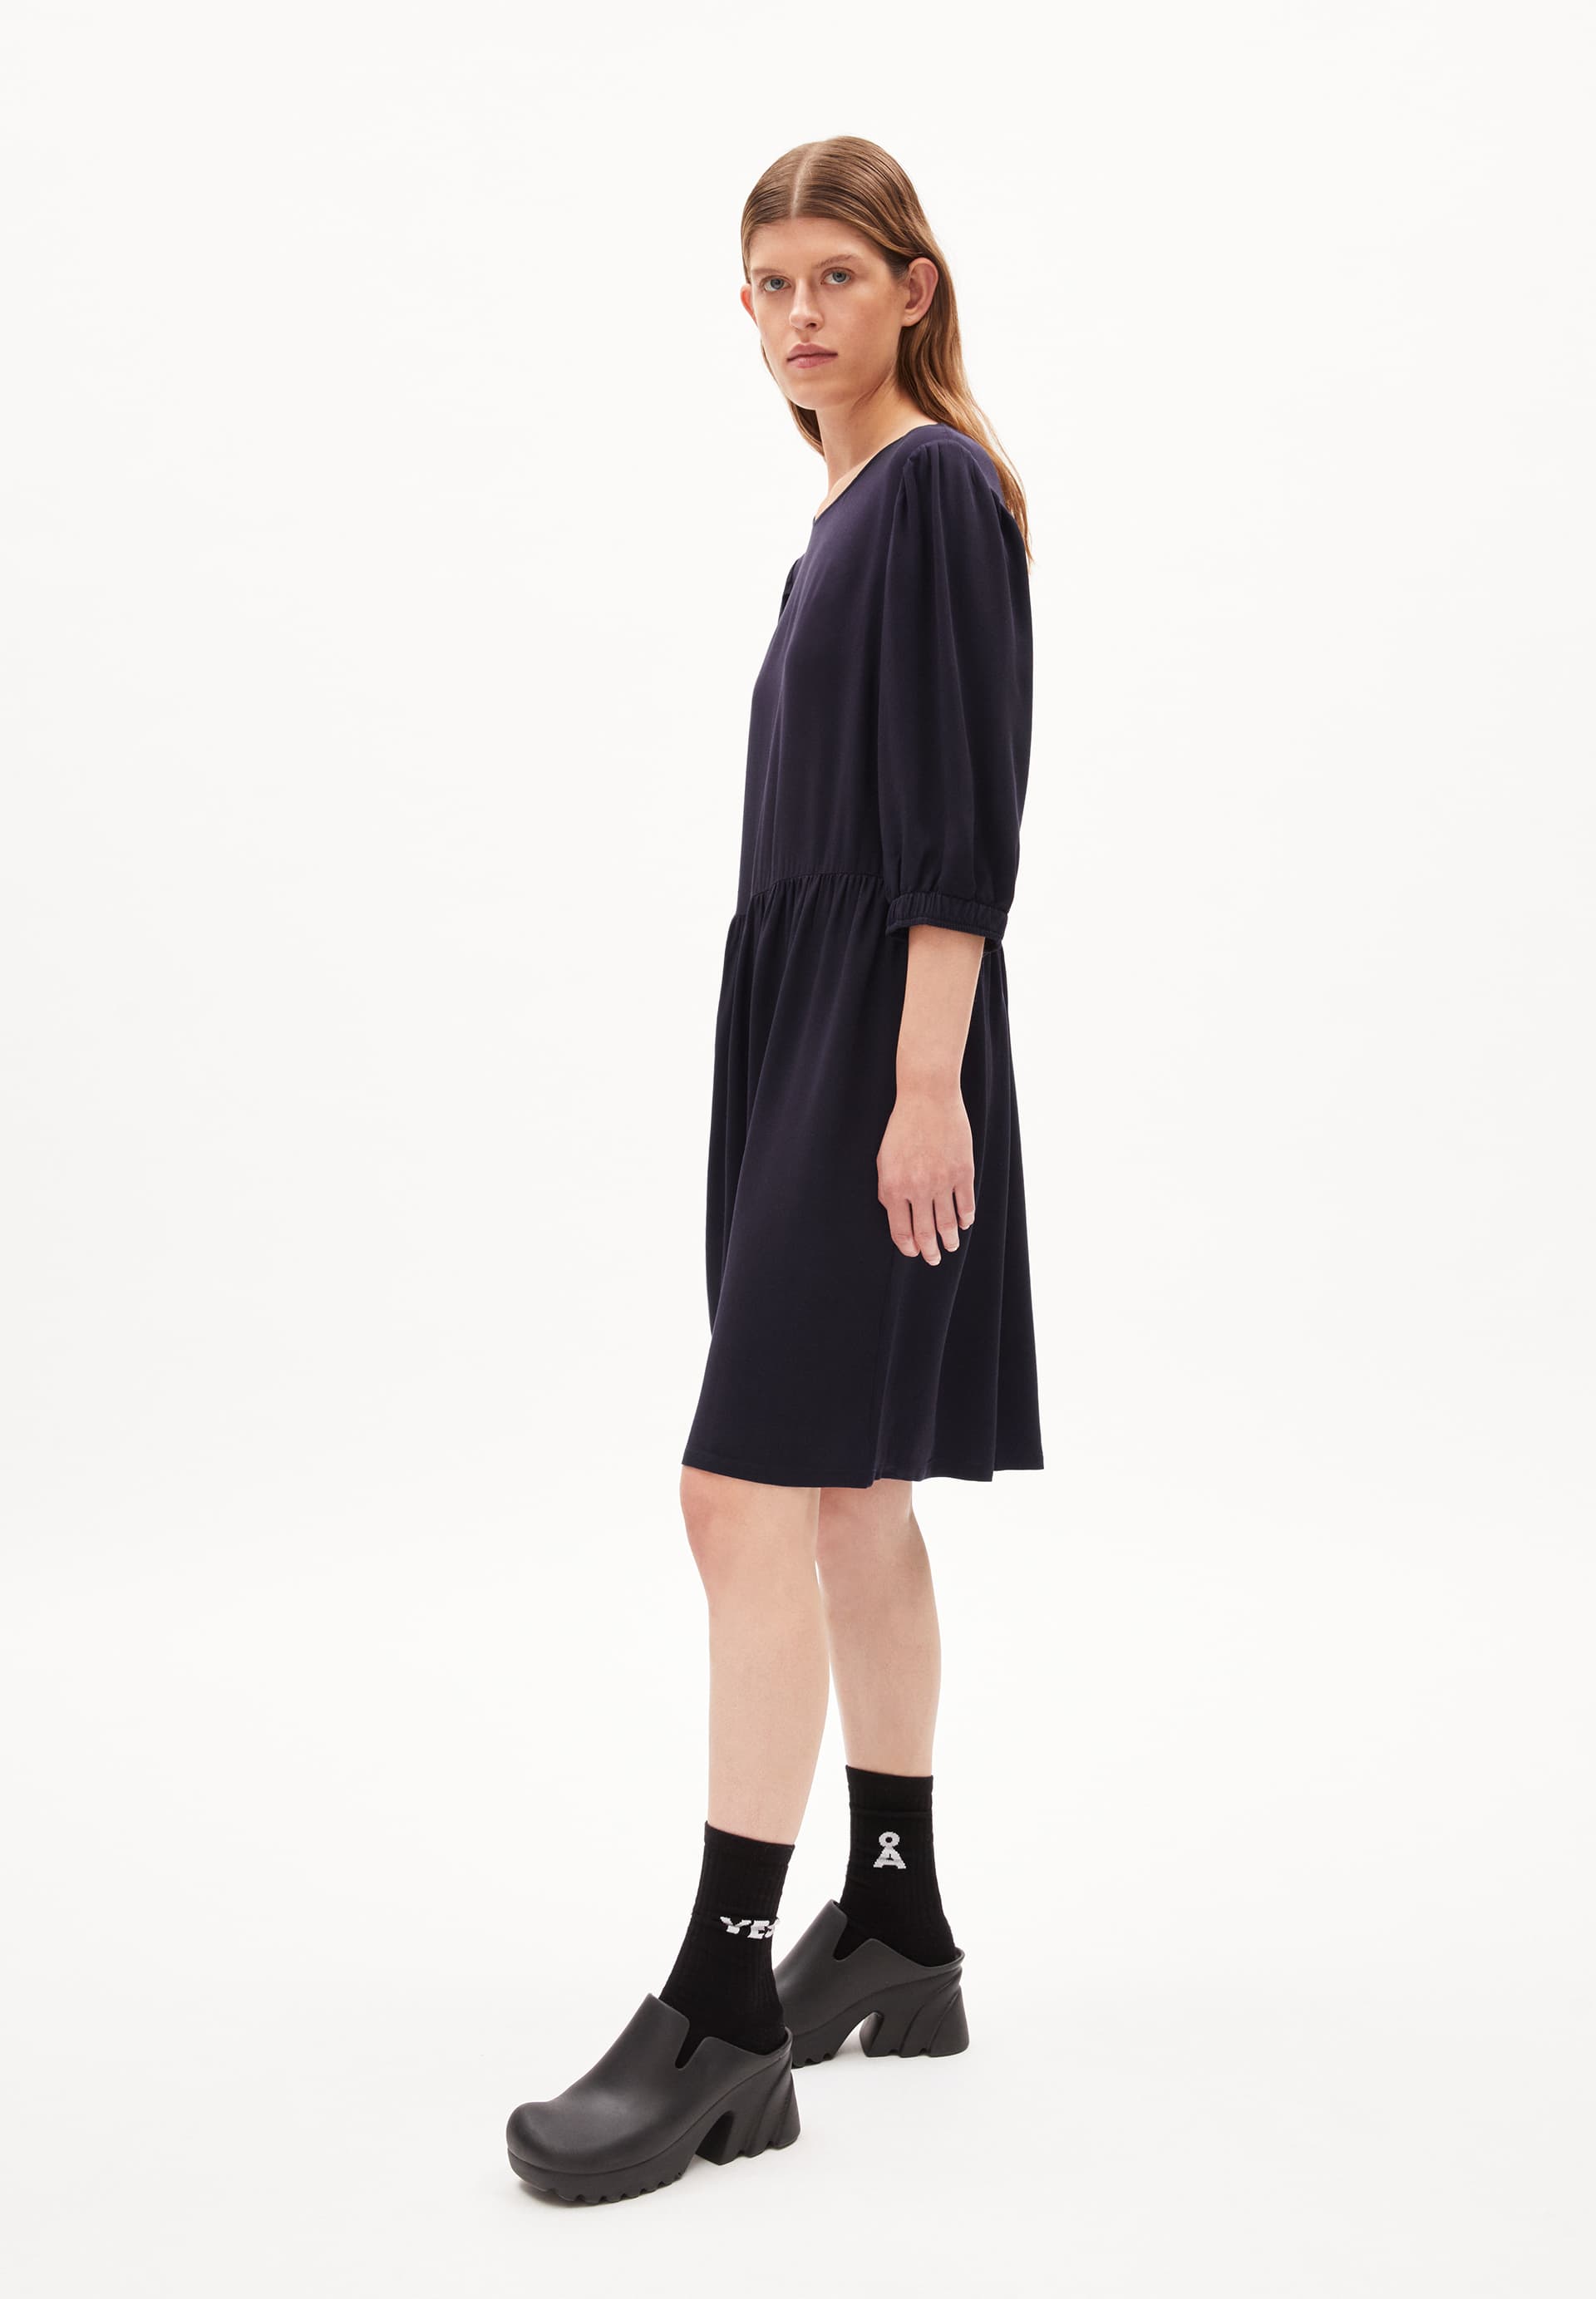 ROSEAA Woven Dress Relaxed Fit made of LENZING™ ECOVERO™ Viscose